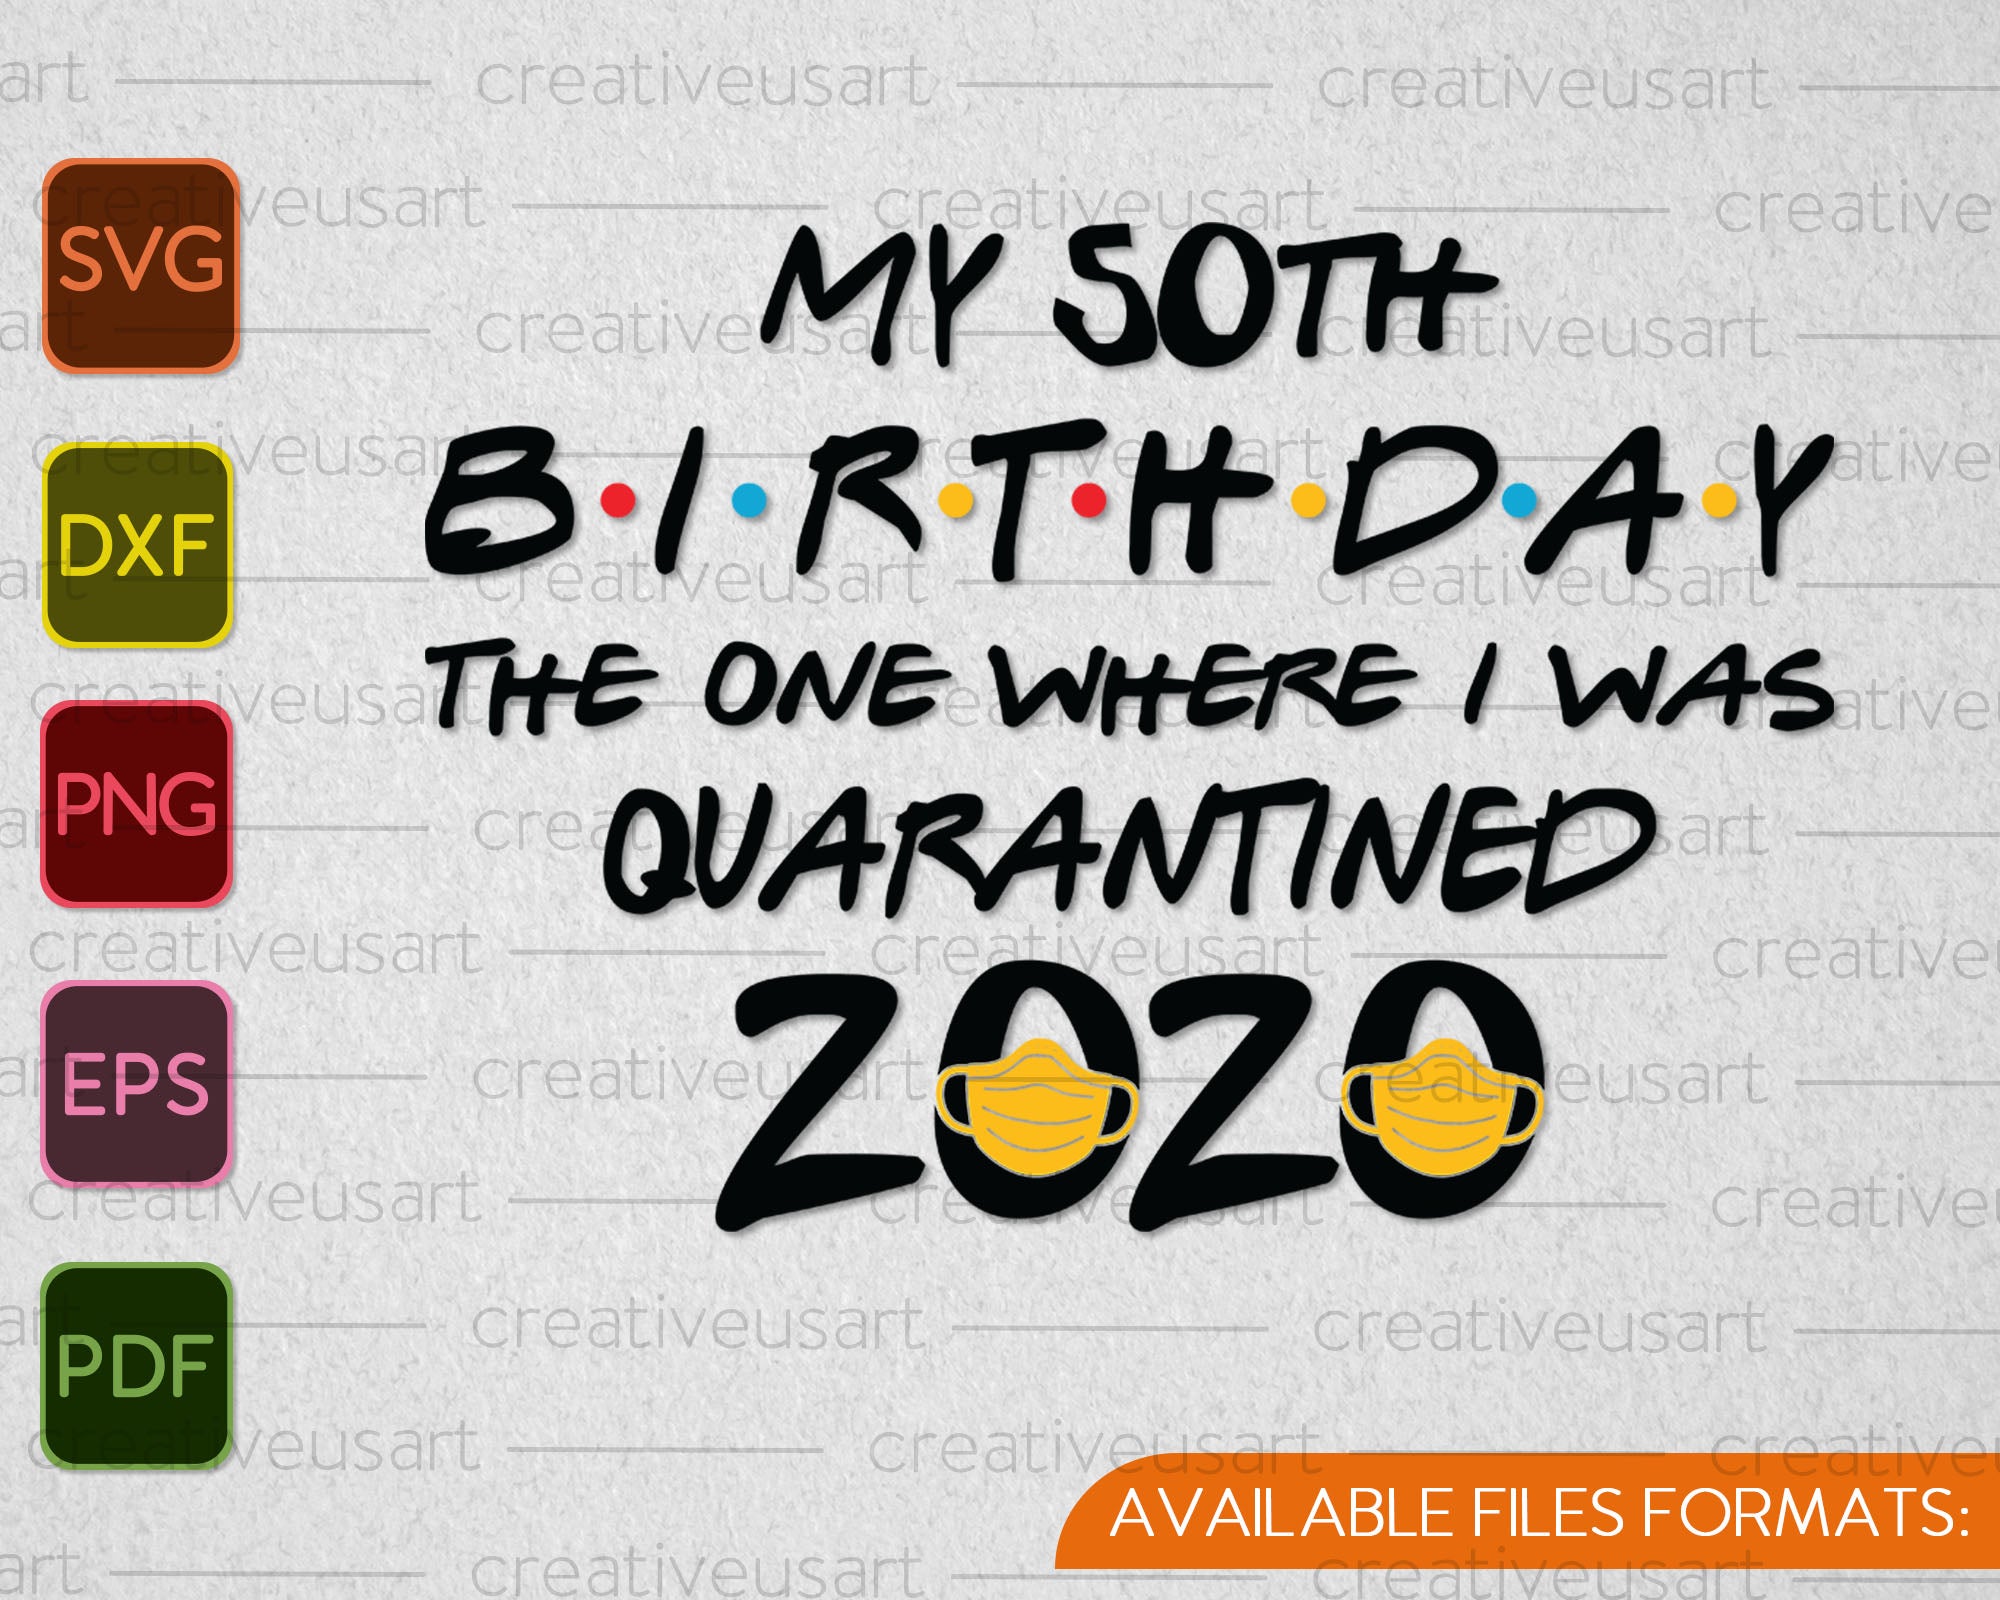 Download My 50th Birthday The one where I was Quarantined 2020 SVG PNG Files - creativeusart